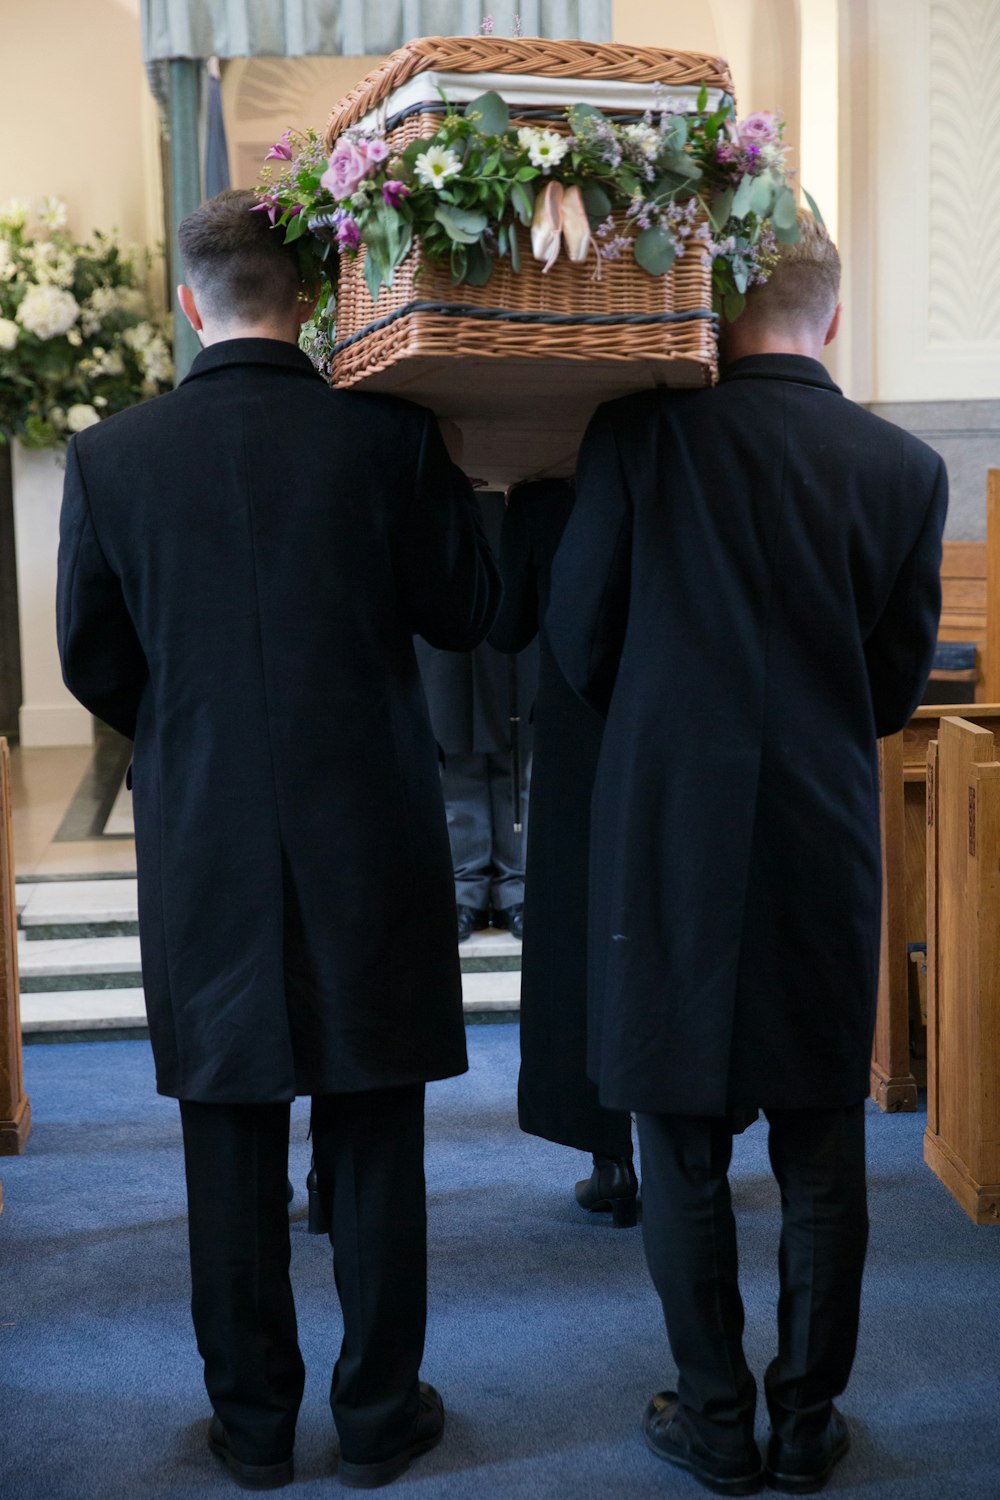 two men carrying a casket with flowers on it